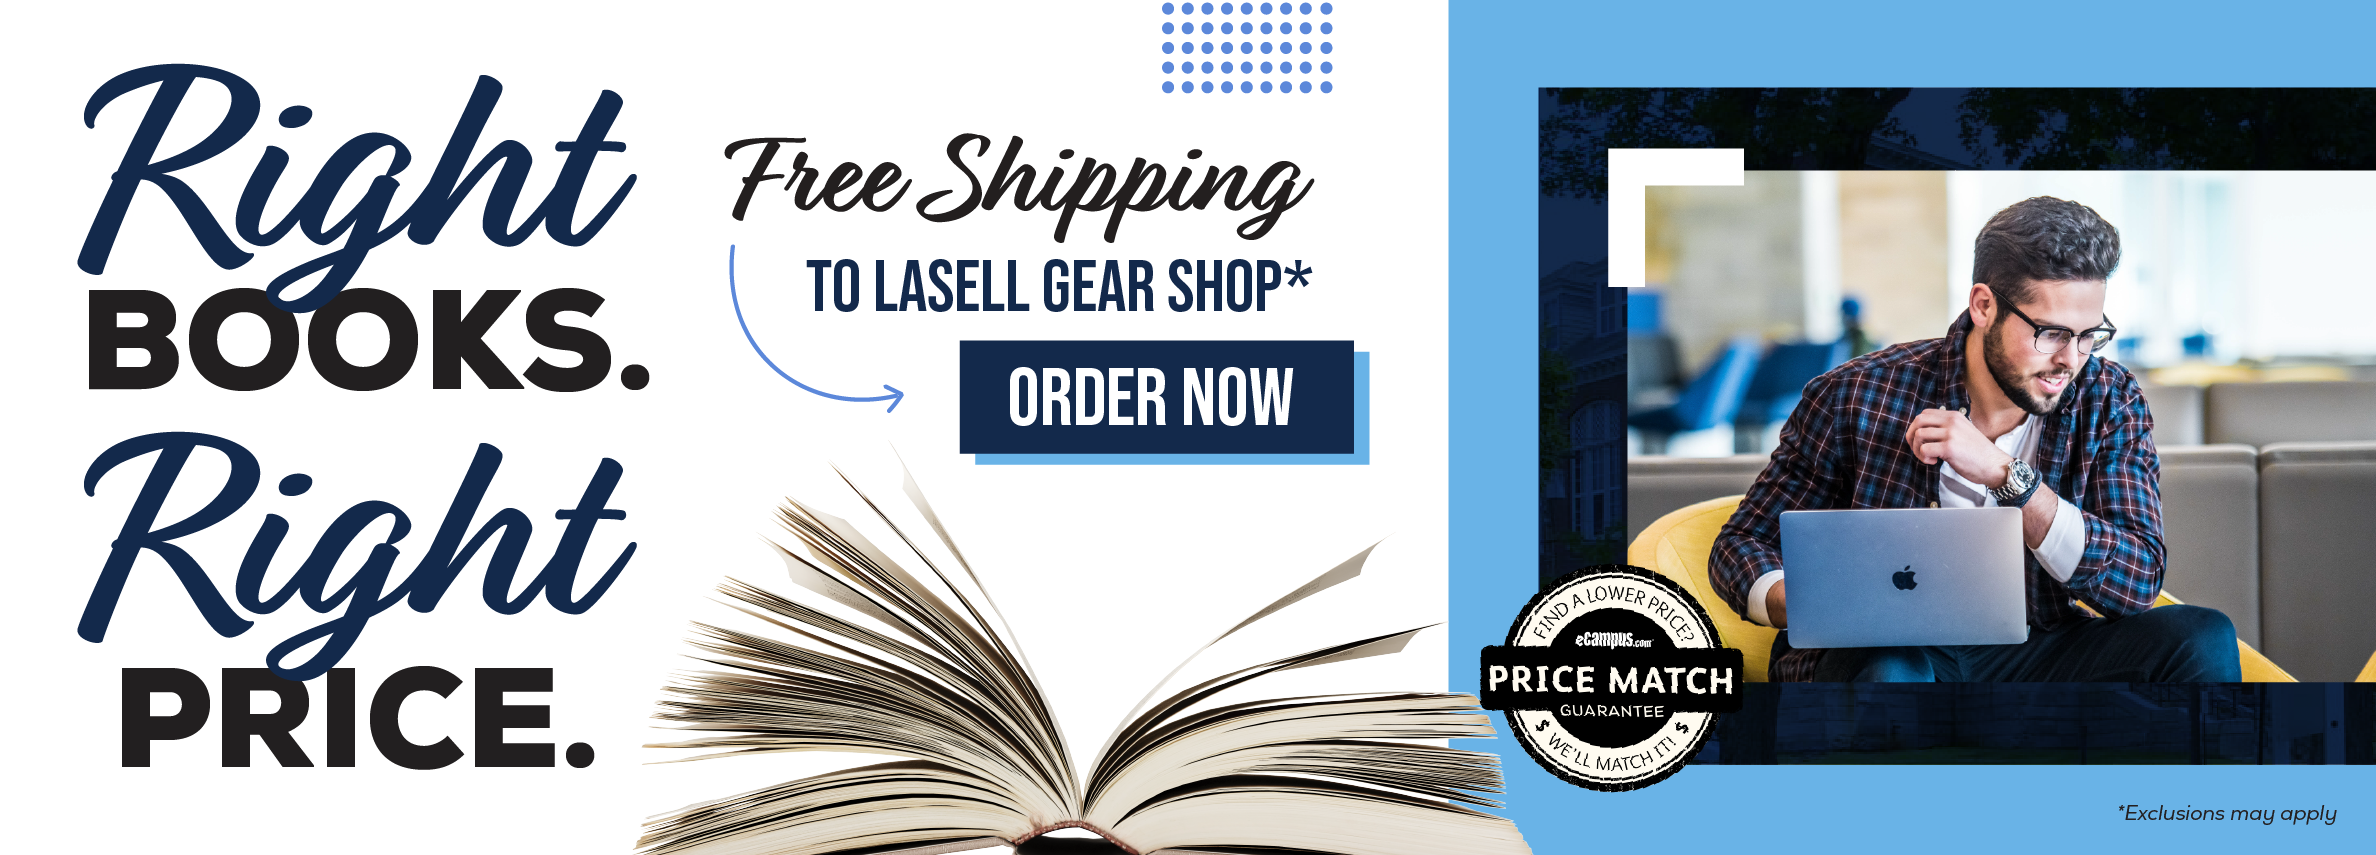 Right books. Right price. Free shipping to Lasell Gear Shop.* Order now. Price Match Guarantee. *Exclusions may apply.